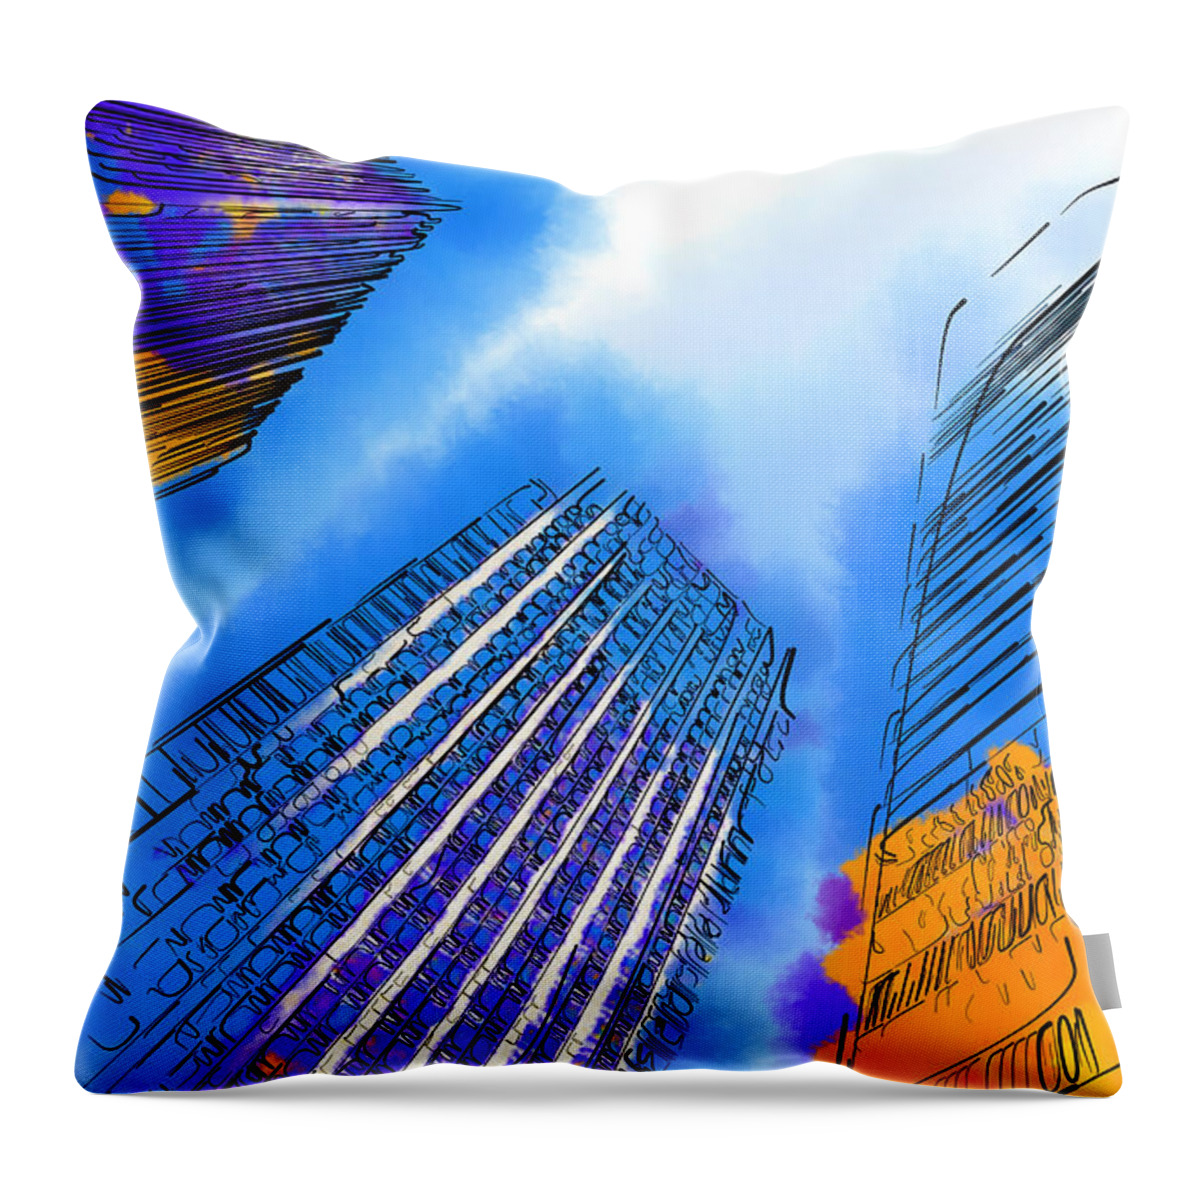 Seattle Throw Pillow featuring the digital art The Three Towers by Kirt Tisdale